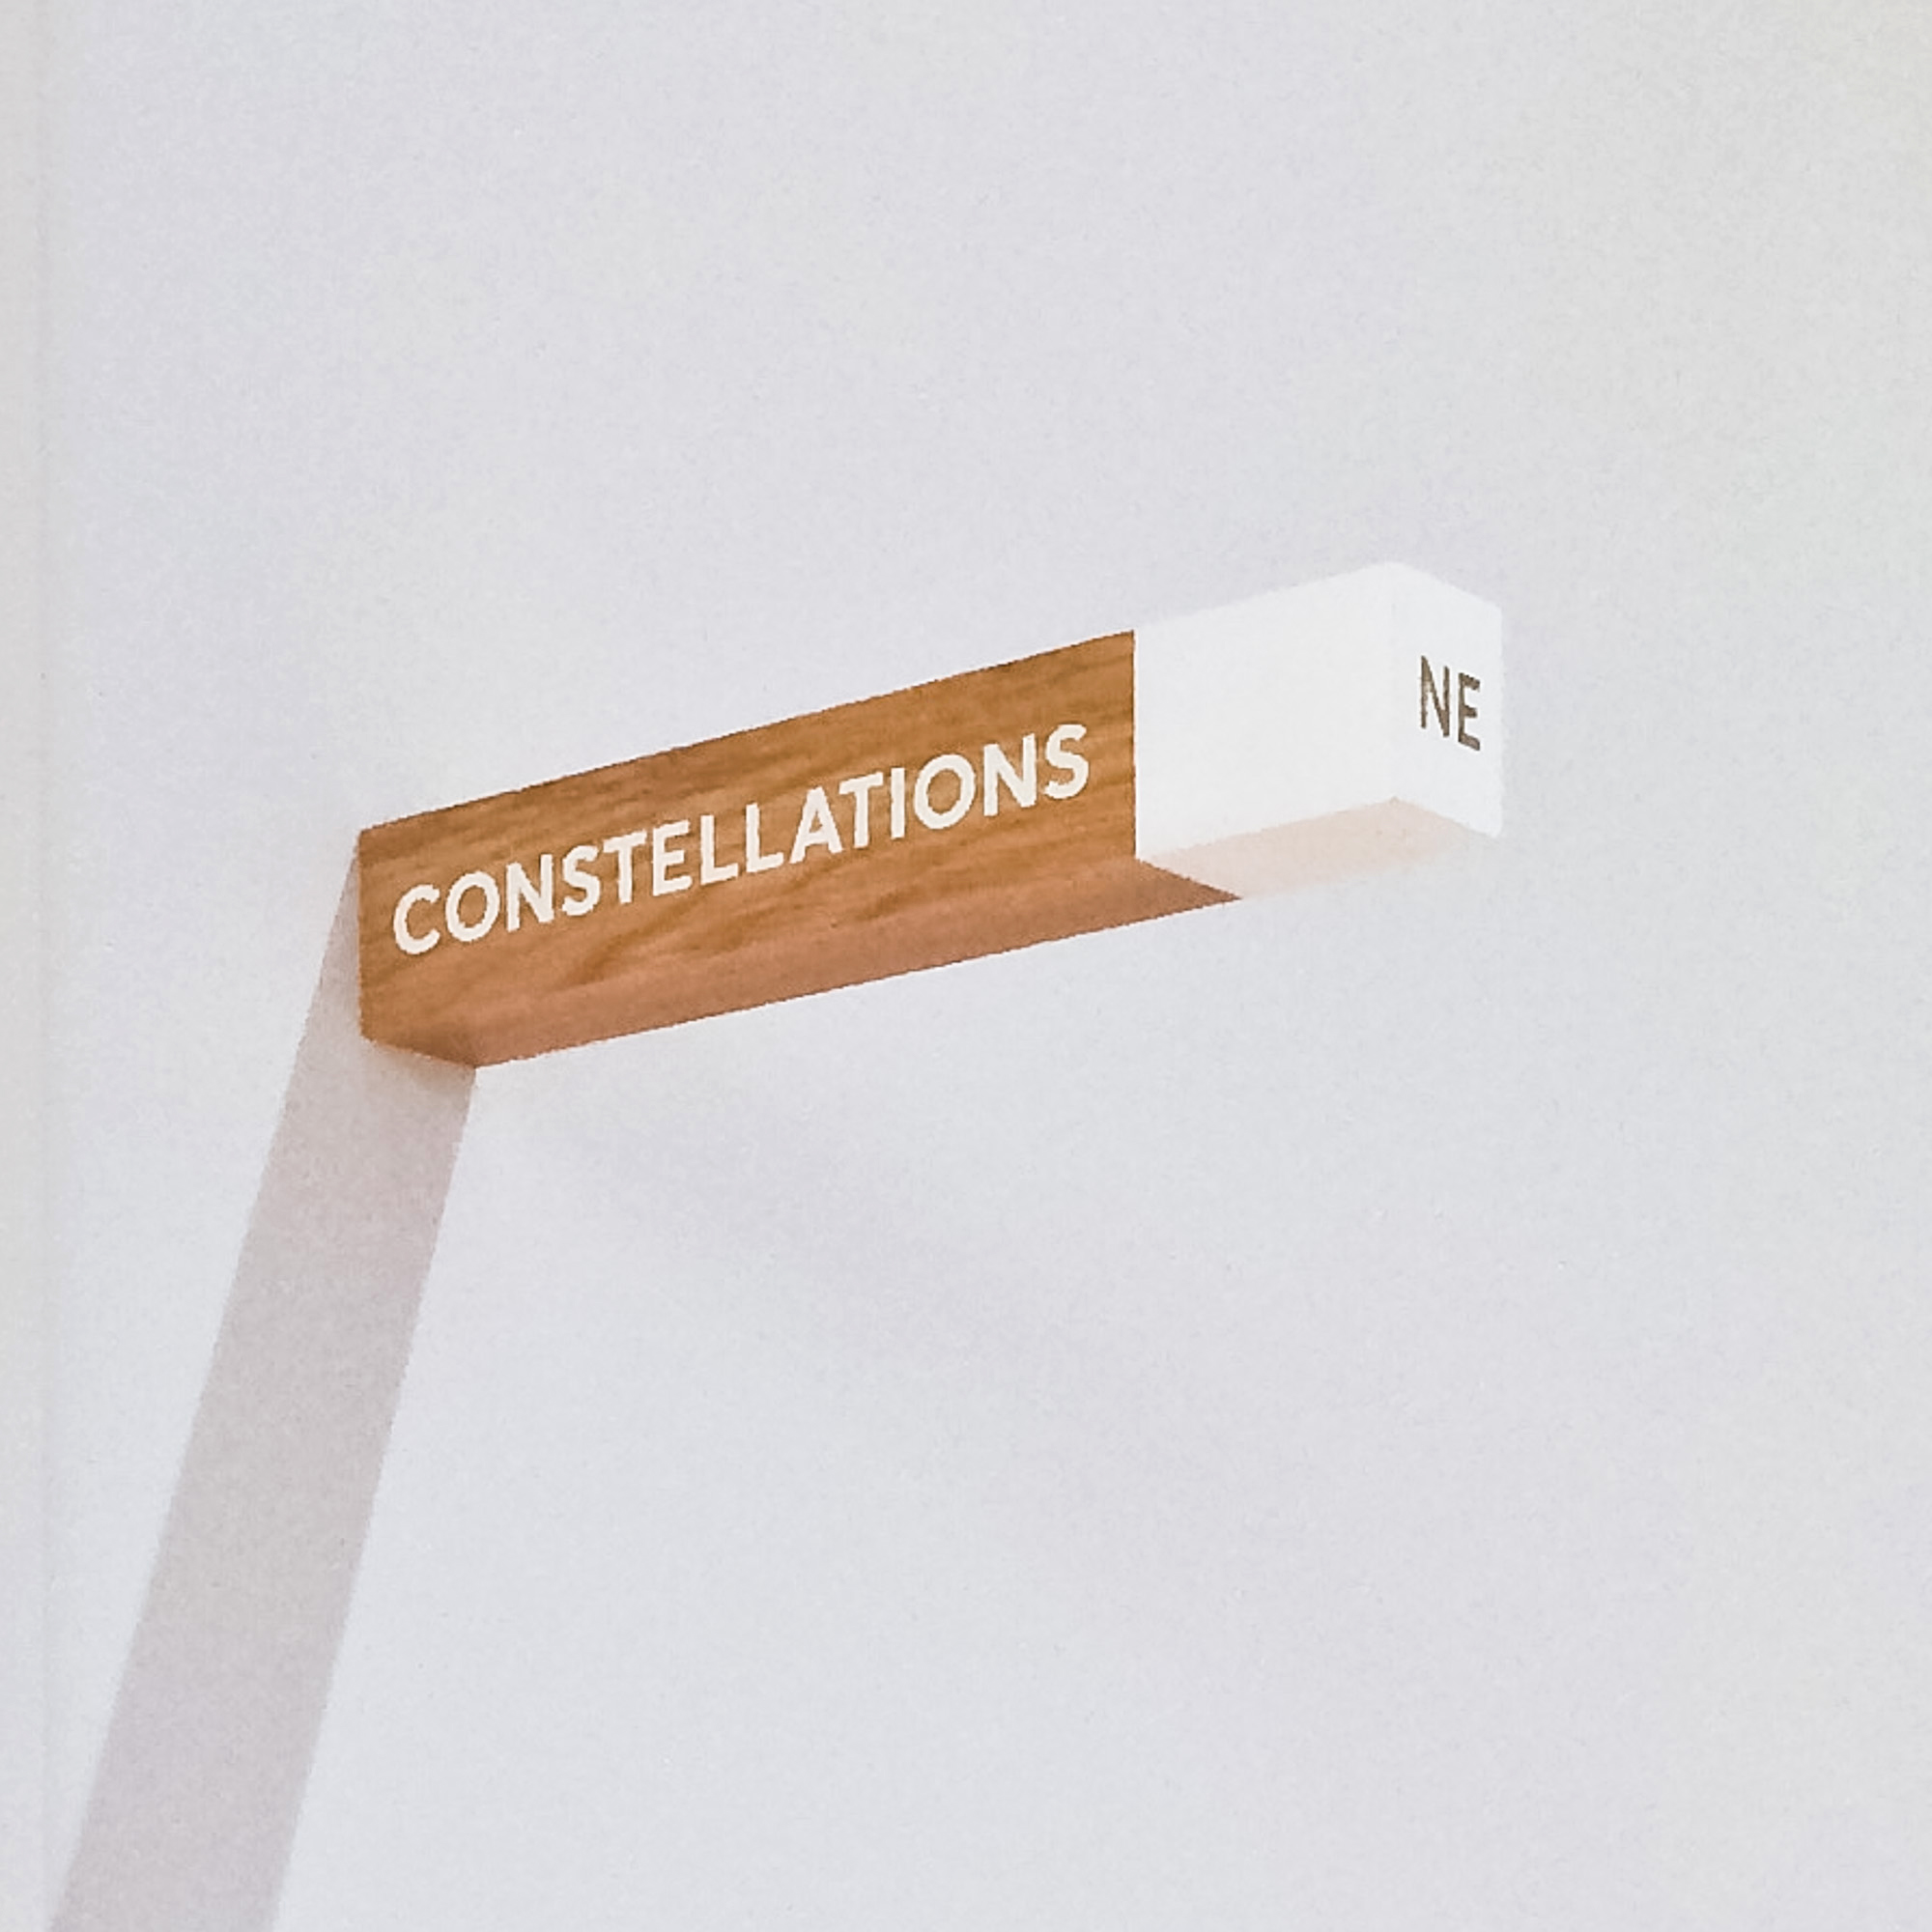 White-painted wood, national park-inspired, overhead wayfinding sign for the office of Slack, a cloud-based set of proprietary team collaboration tools and services.